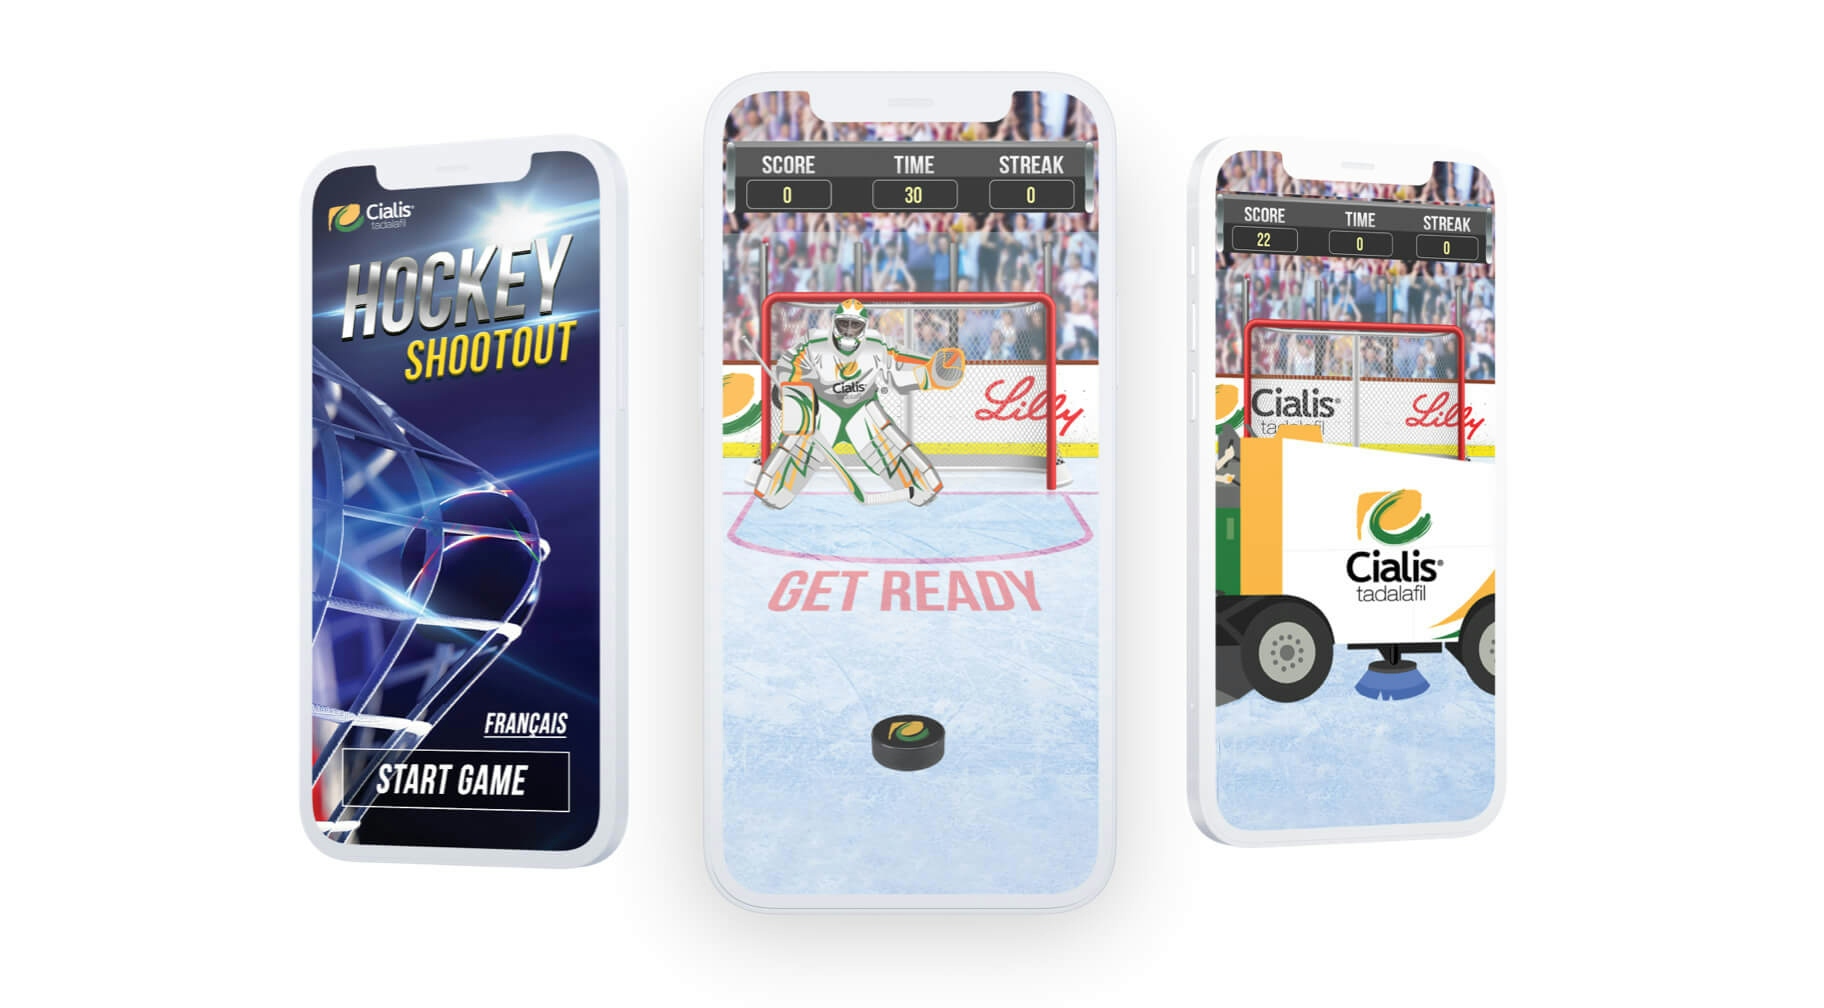 Hockey shootout game that Elite Digital developed for Cialis on mobile.